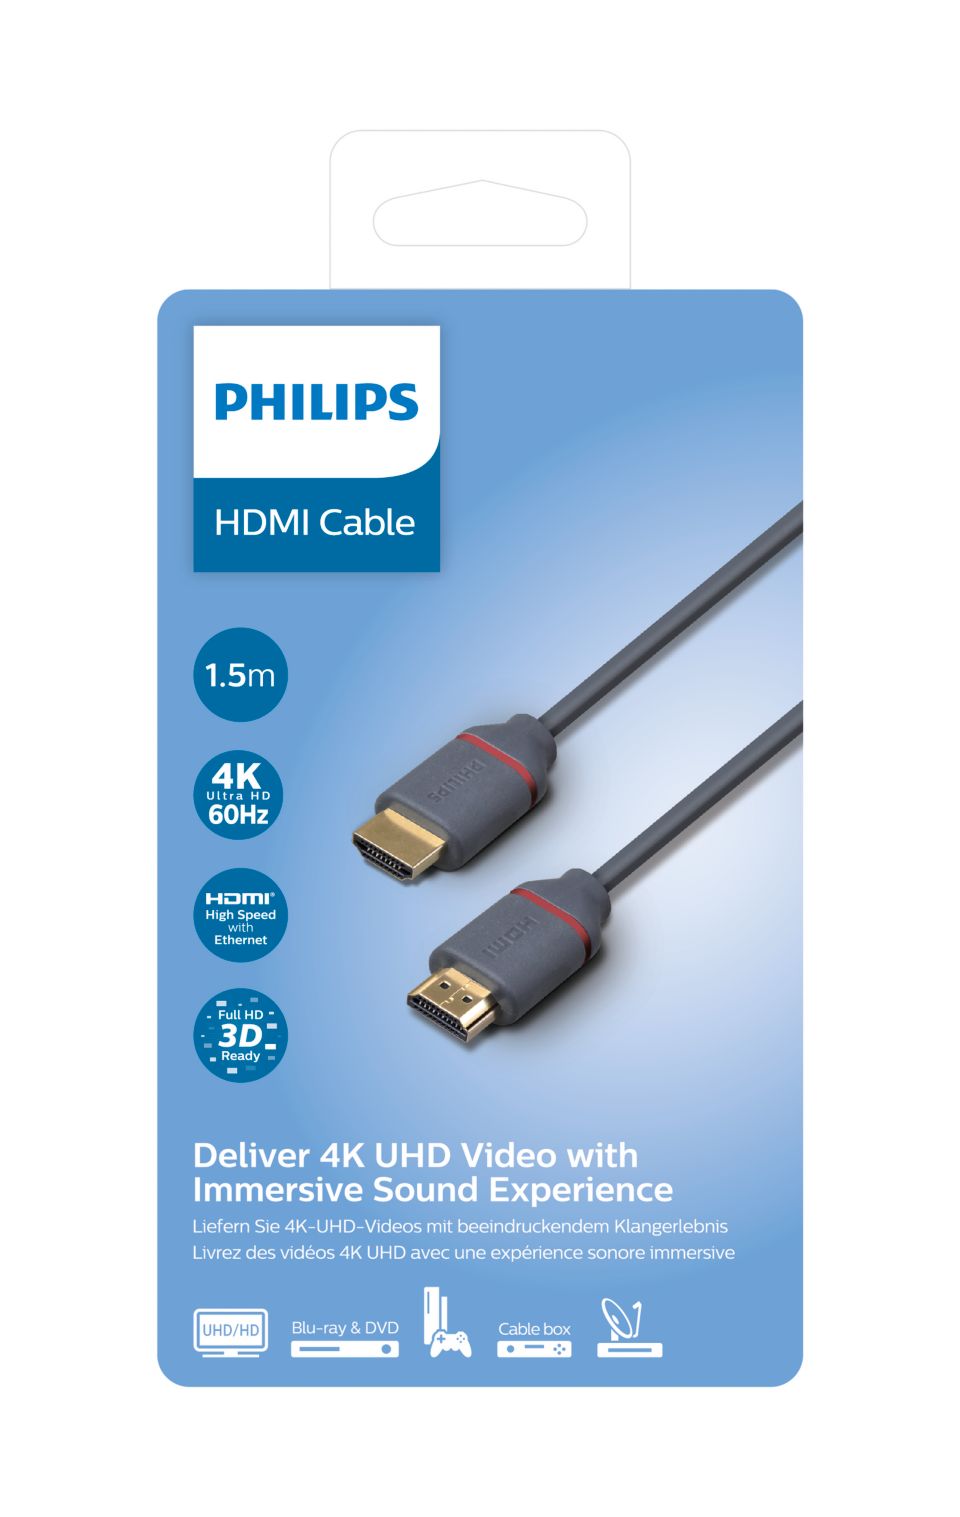 hellige interview Exert HDMI cable SWV5613G/00 | Philips